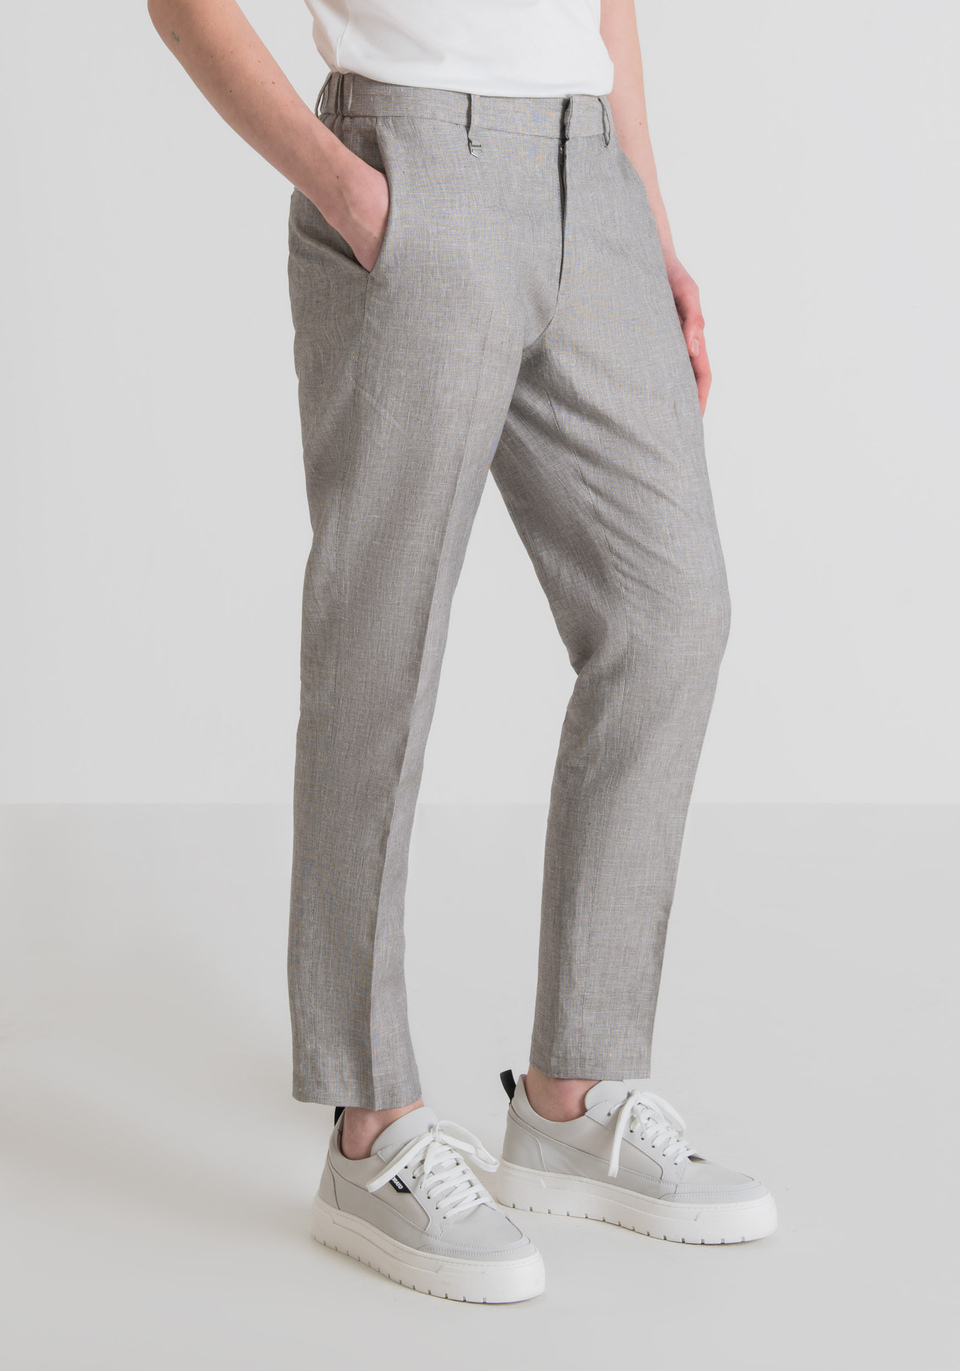 SLIM-FIT “ARTHUR” TROUSERS IN A LINEN-COTTON BLEND WITH AN ELASTICATED DRAWSTRING WAIST - Antony Morato Online Shop